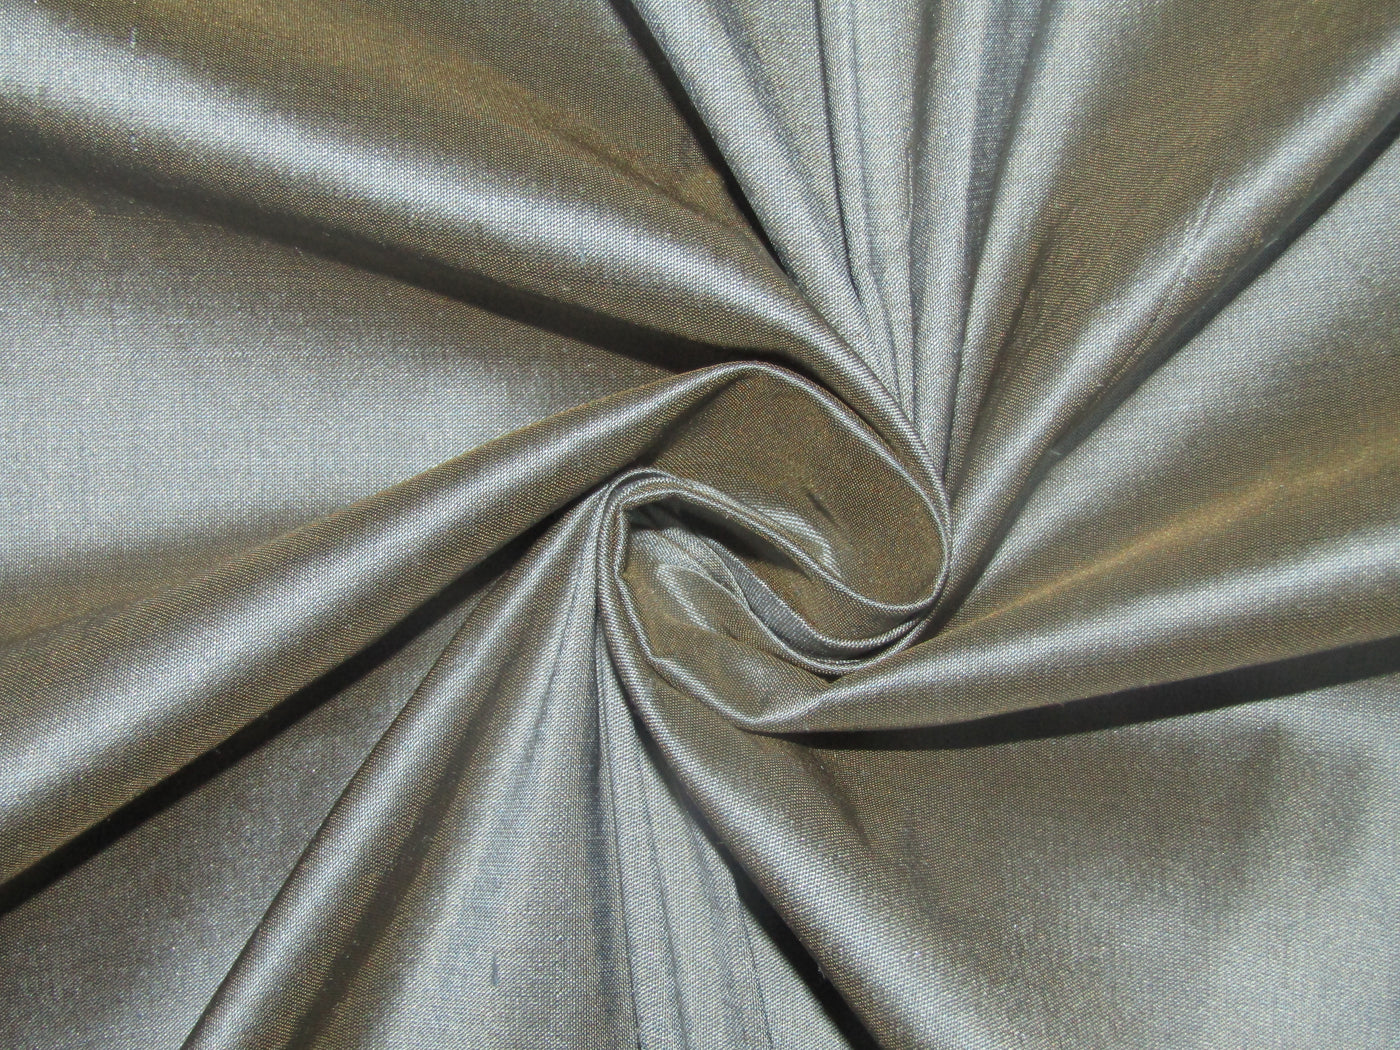 100% Pure SILK Dupion FABRIC Silver Blue with Brown Shot color 54" wide DUP87